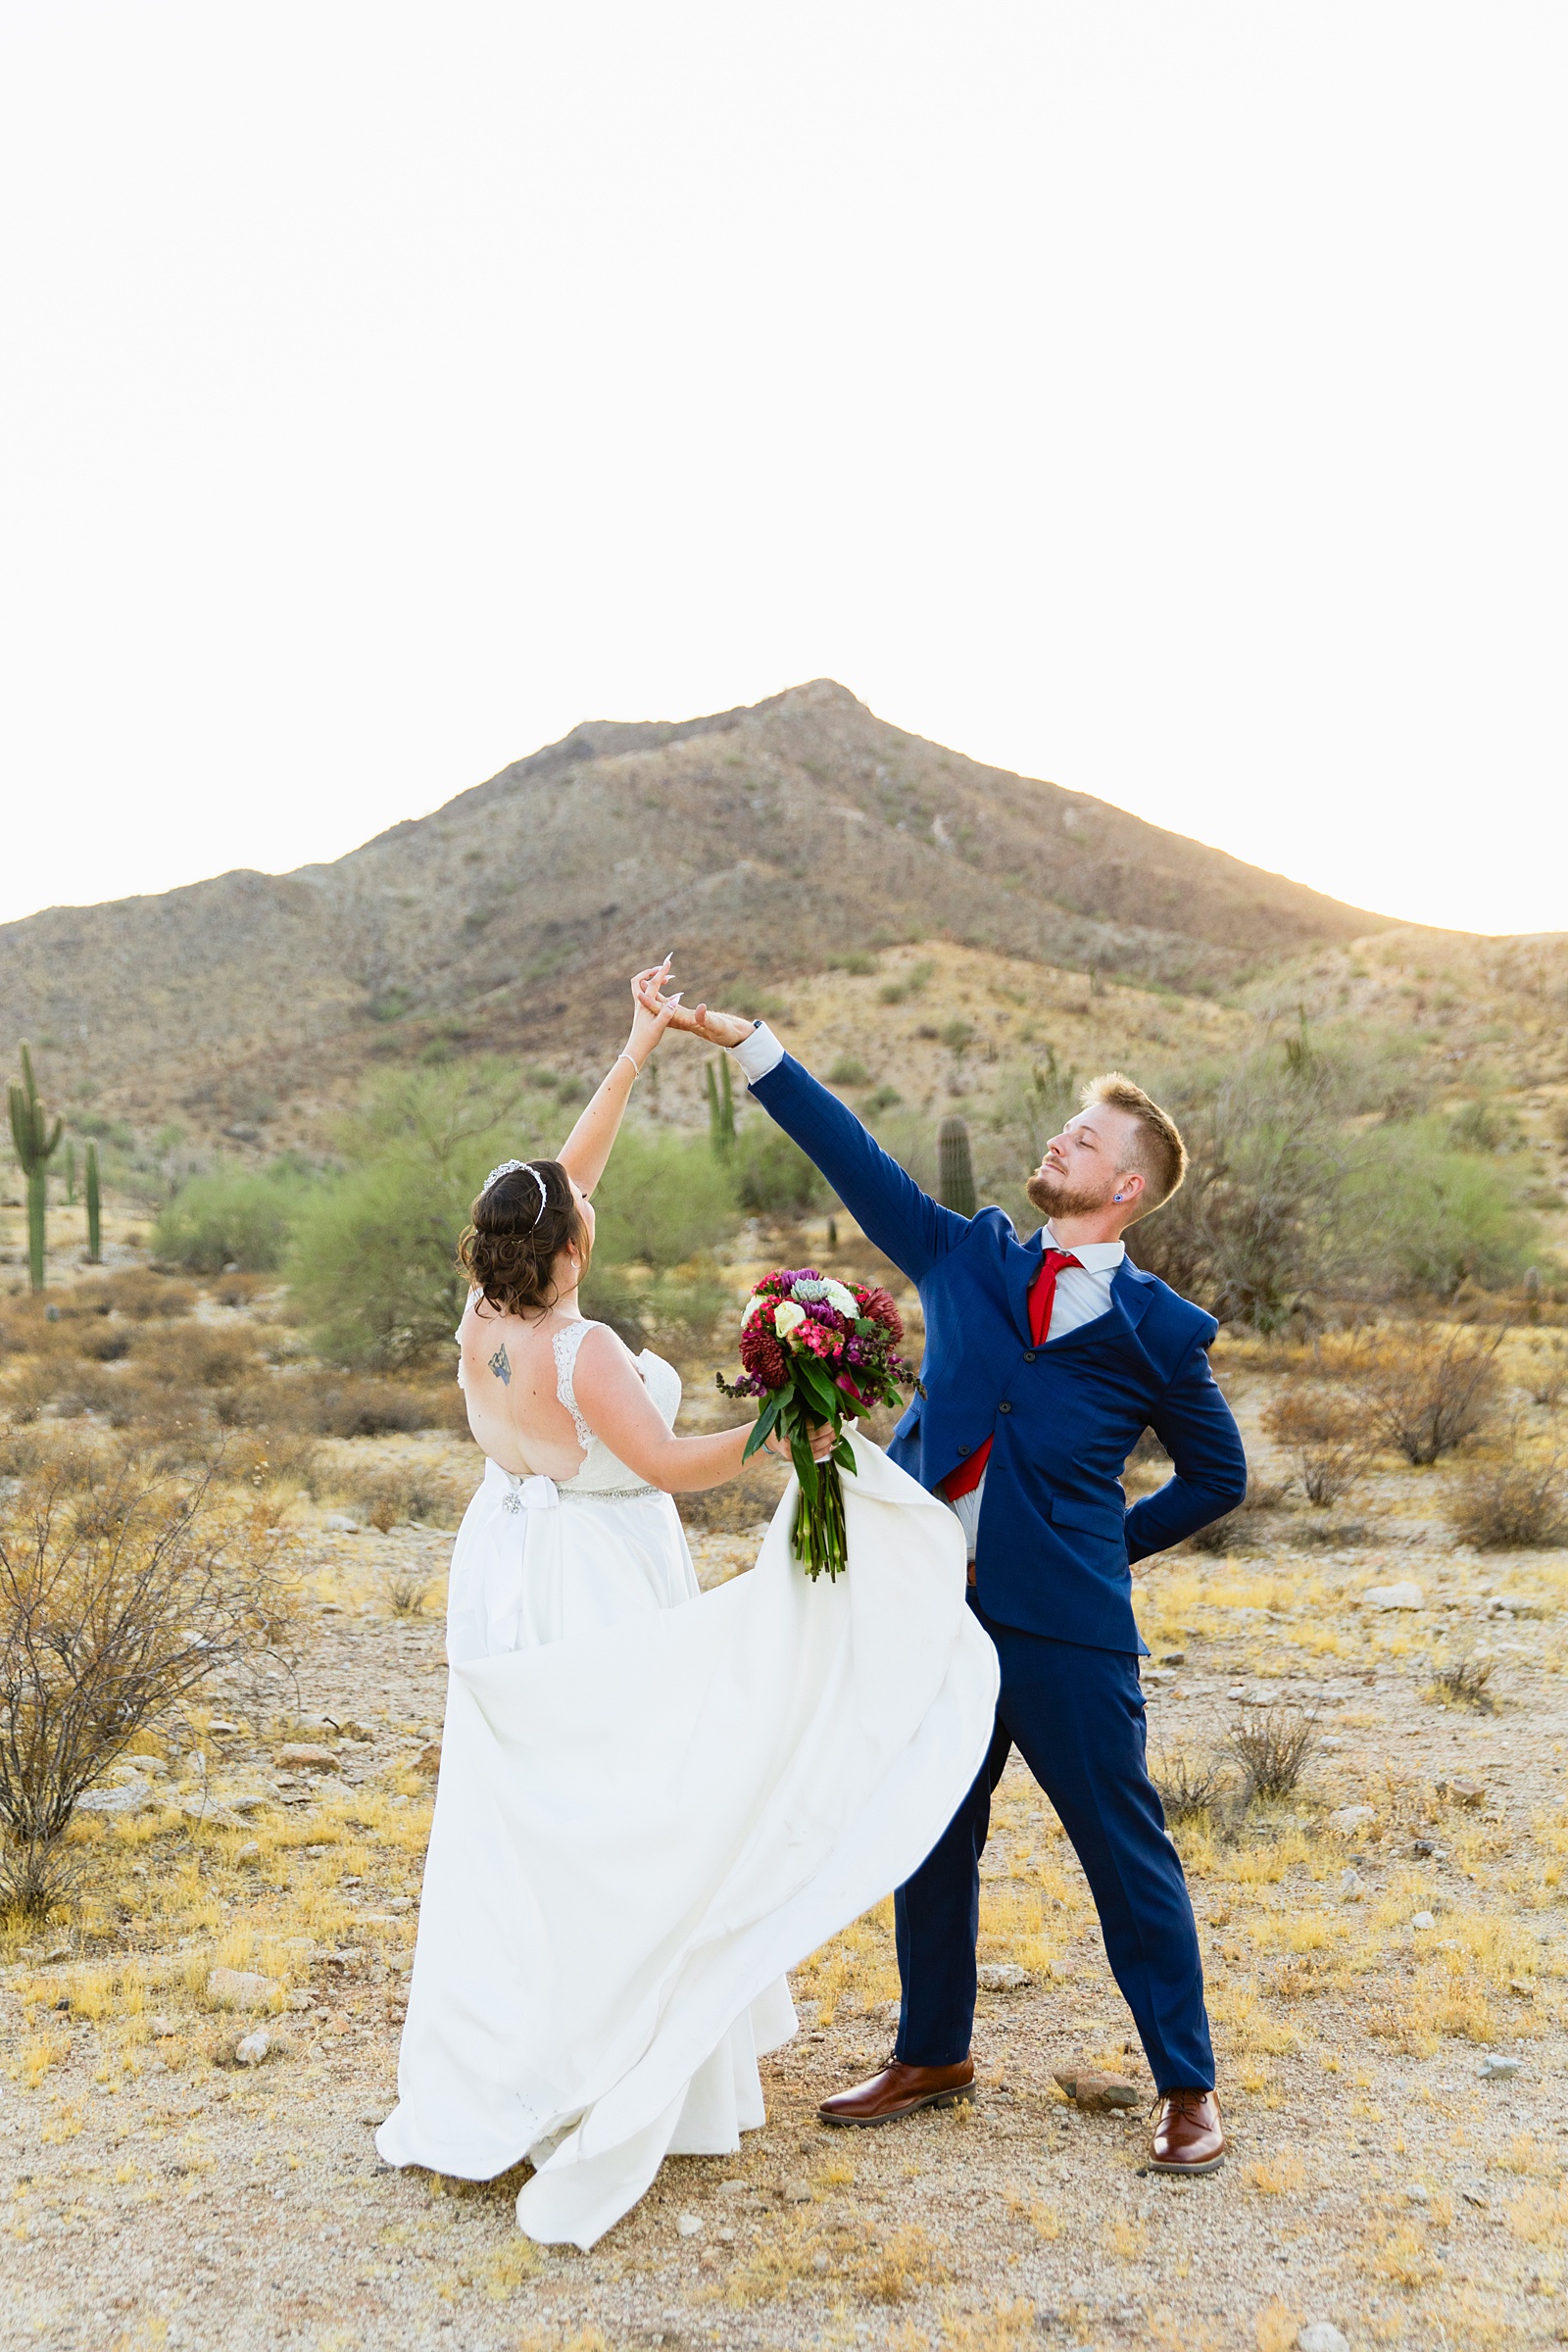 Bride and groom having fun together during their intimate desert wedding by Phoenix wedding photographer Juniper and Co Photography.